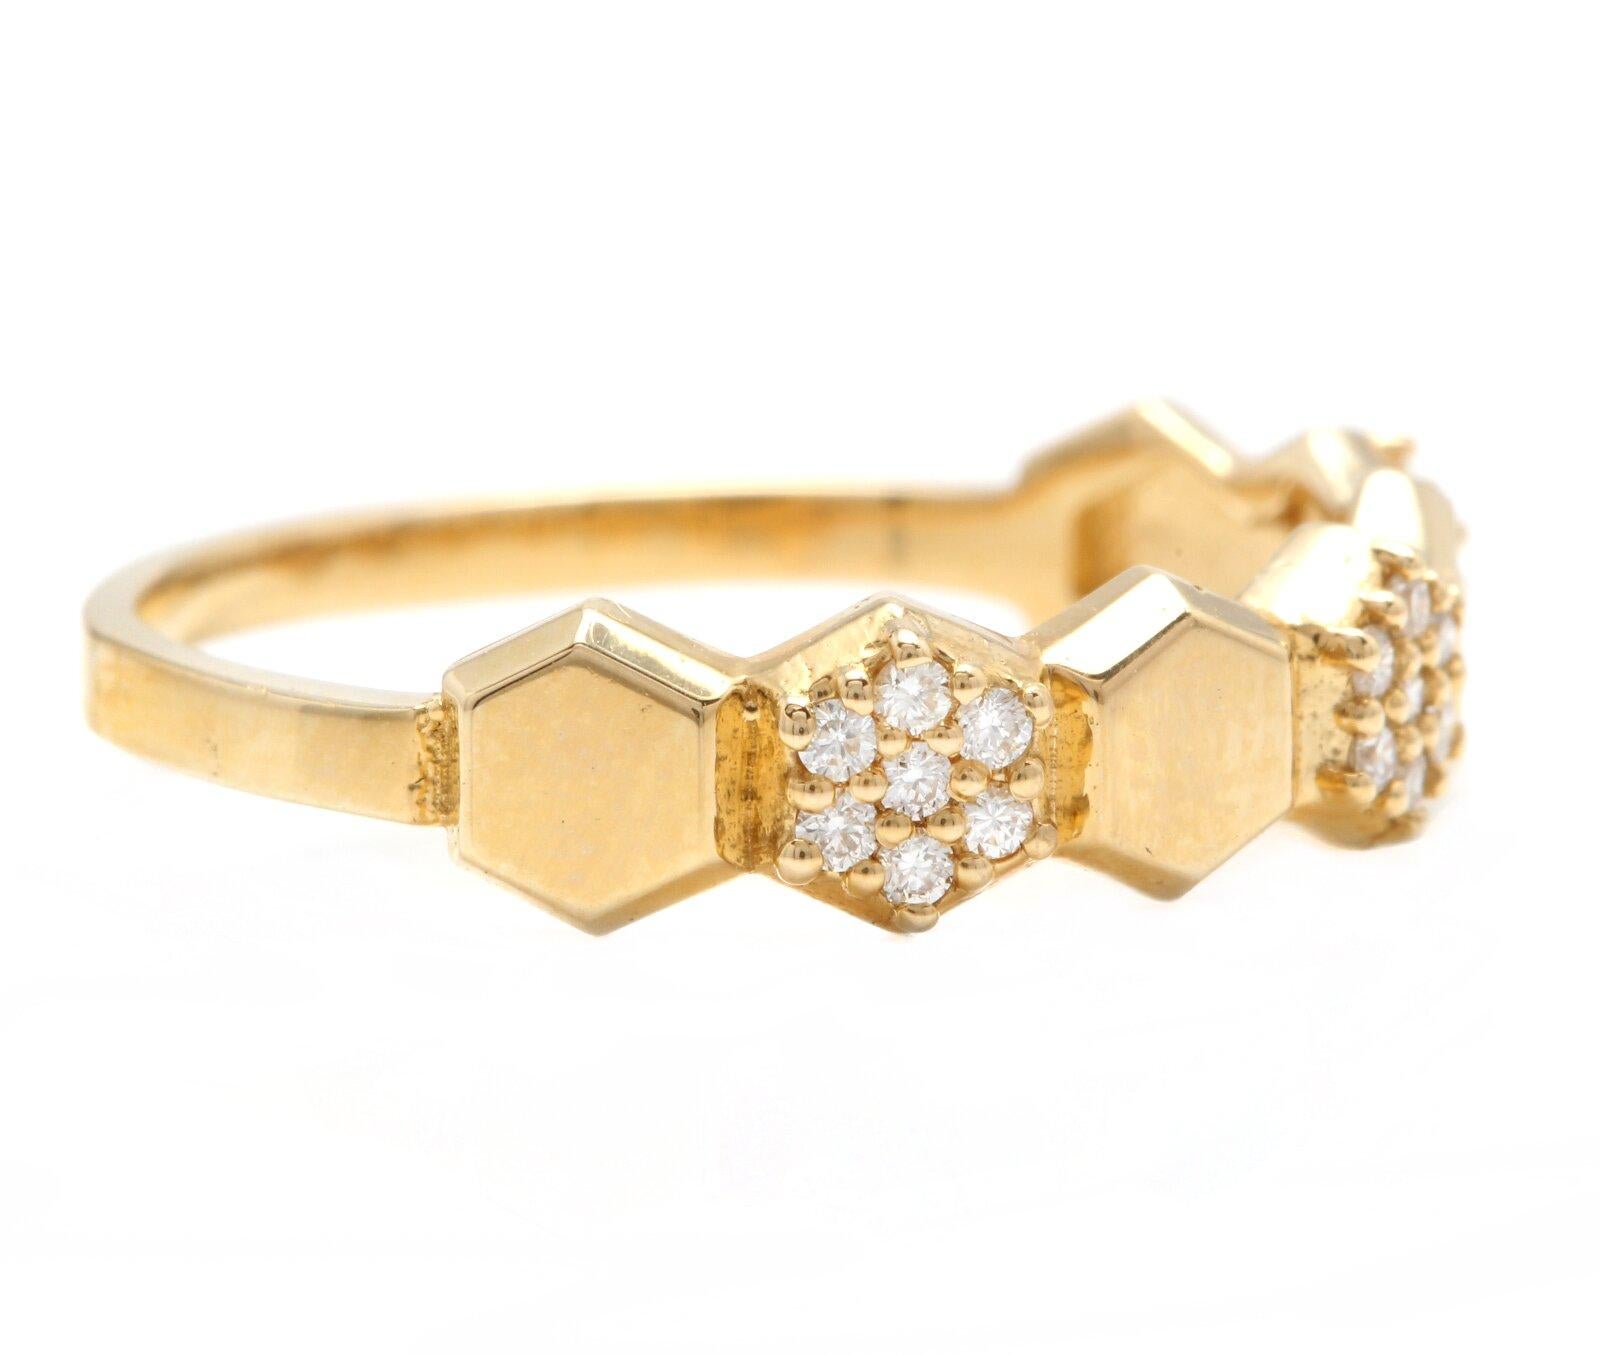 Superb 0.20 Carats Natural Diamond 14K Solid Yellow Gold Ring

Suggested Replacement Value: Approx. $1,300.00

Stamped: 14K

Total Natural Round Cut Diamonds Weight: Approx. 0.20 Carats (color G-H / Clarity SI1-SI2)

The width of the ring is: